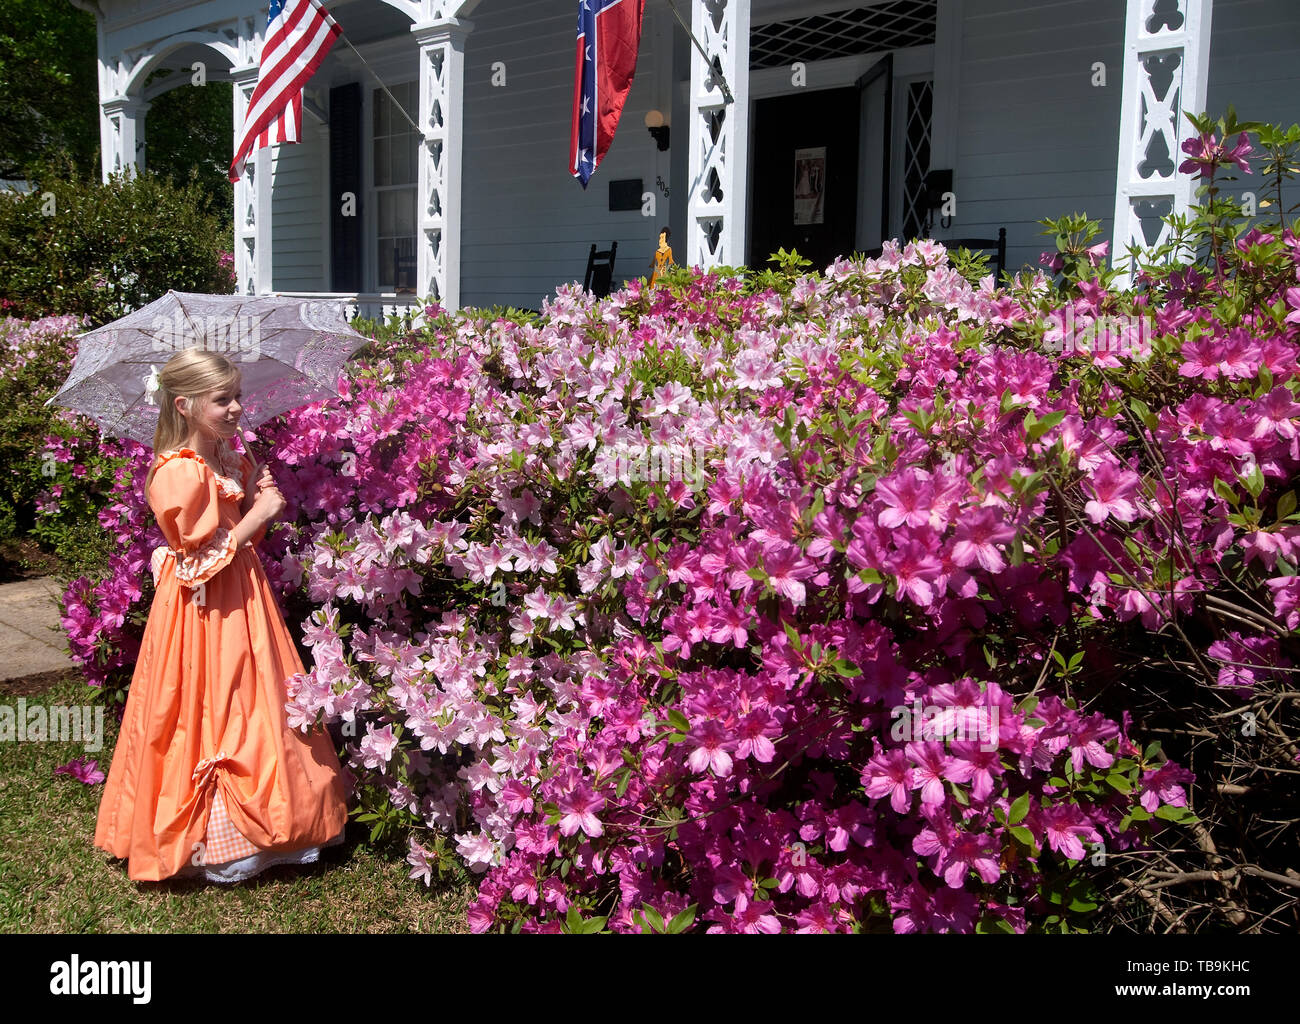 A girl carrying a parasol walks past the azaleas in front of the Amzi Love Home in Columbus, Mississippi, April 17, 2010. Stock Photo